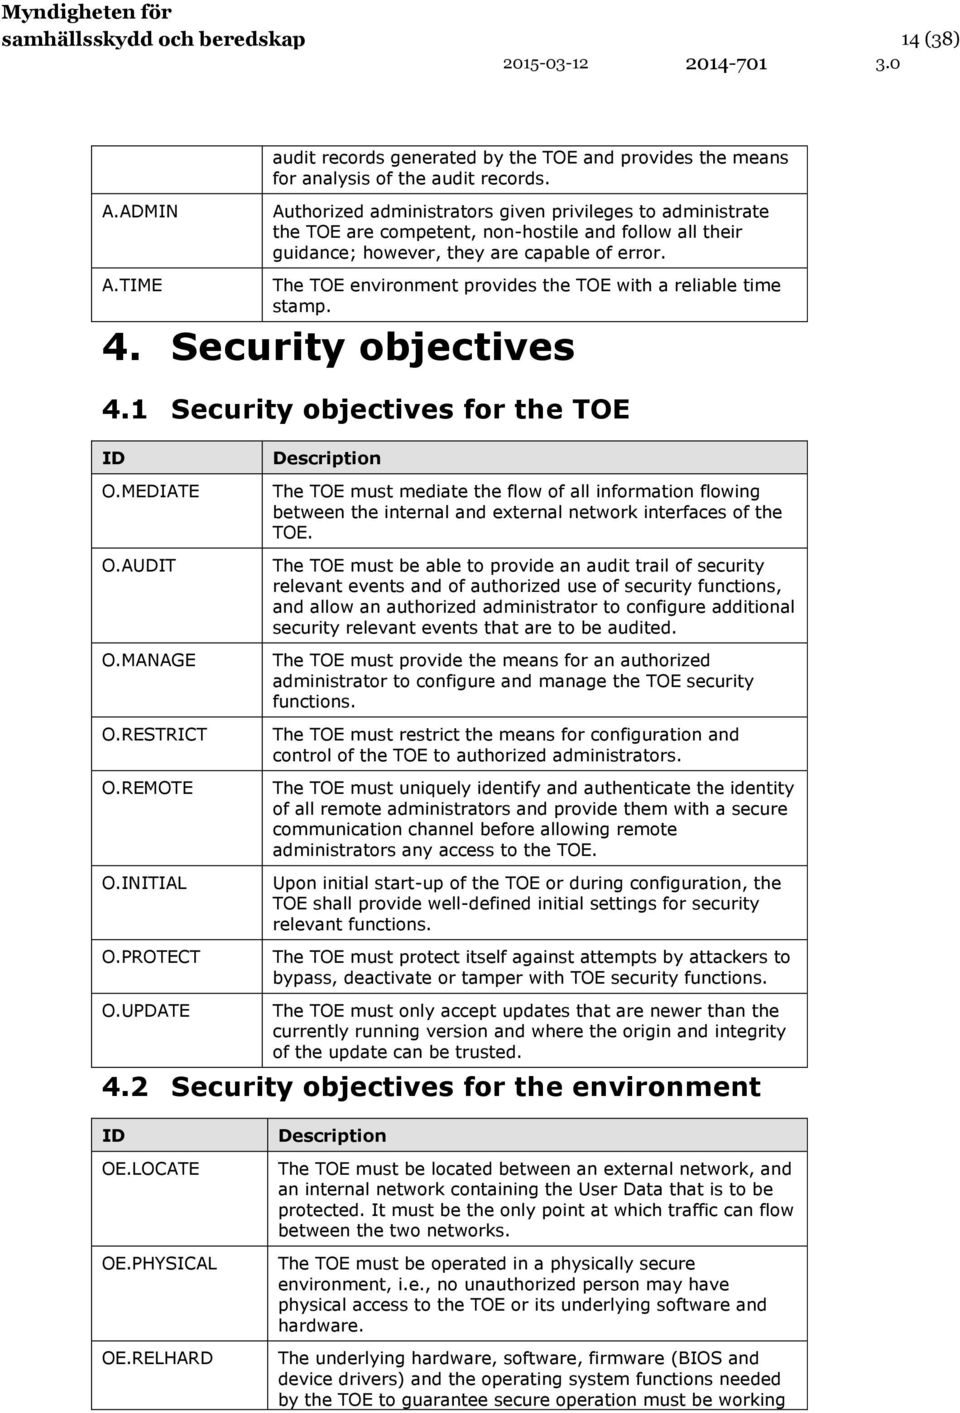 The TOE environment provides the TOE with a reliable time stamp. 4. Security objectives 4.1 Security objectives for the TOE ID O.MEDIATE O.AUDIT O.MANAGE O.RESTRICT O.REMOTE O.INITIAL O.PROTECT O.